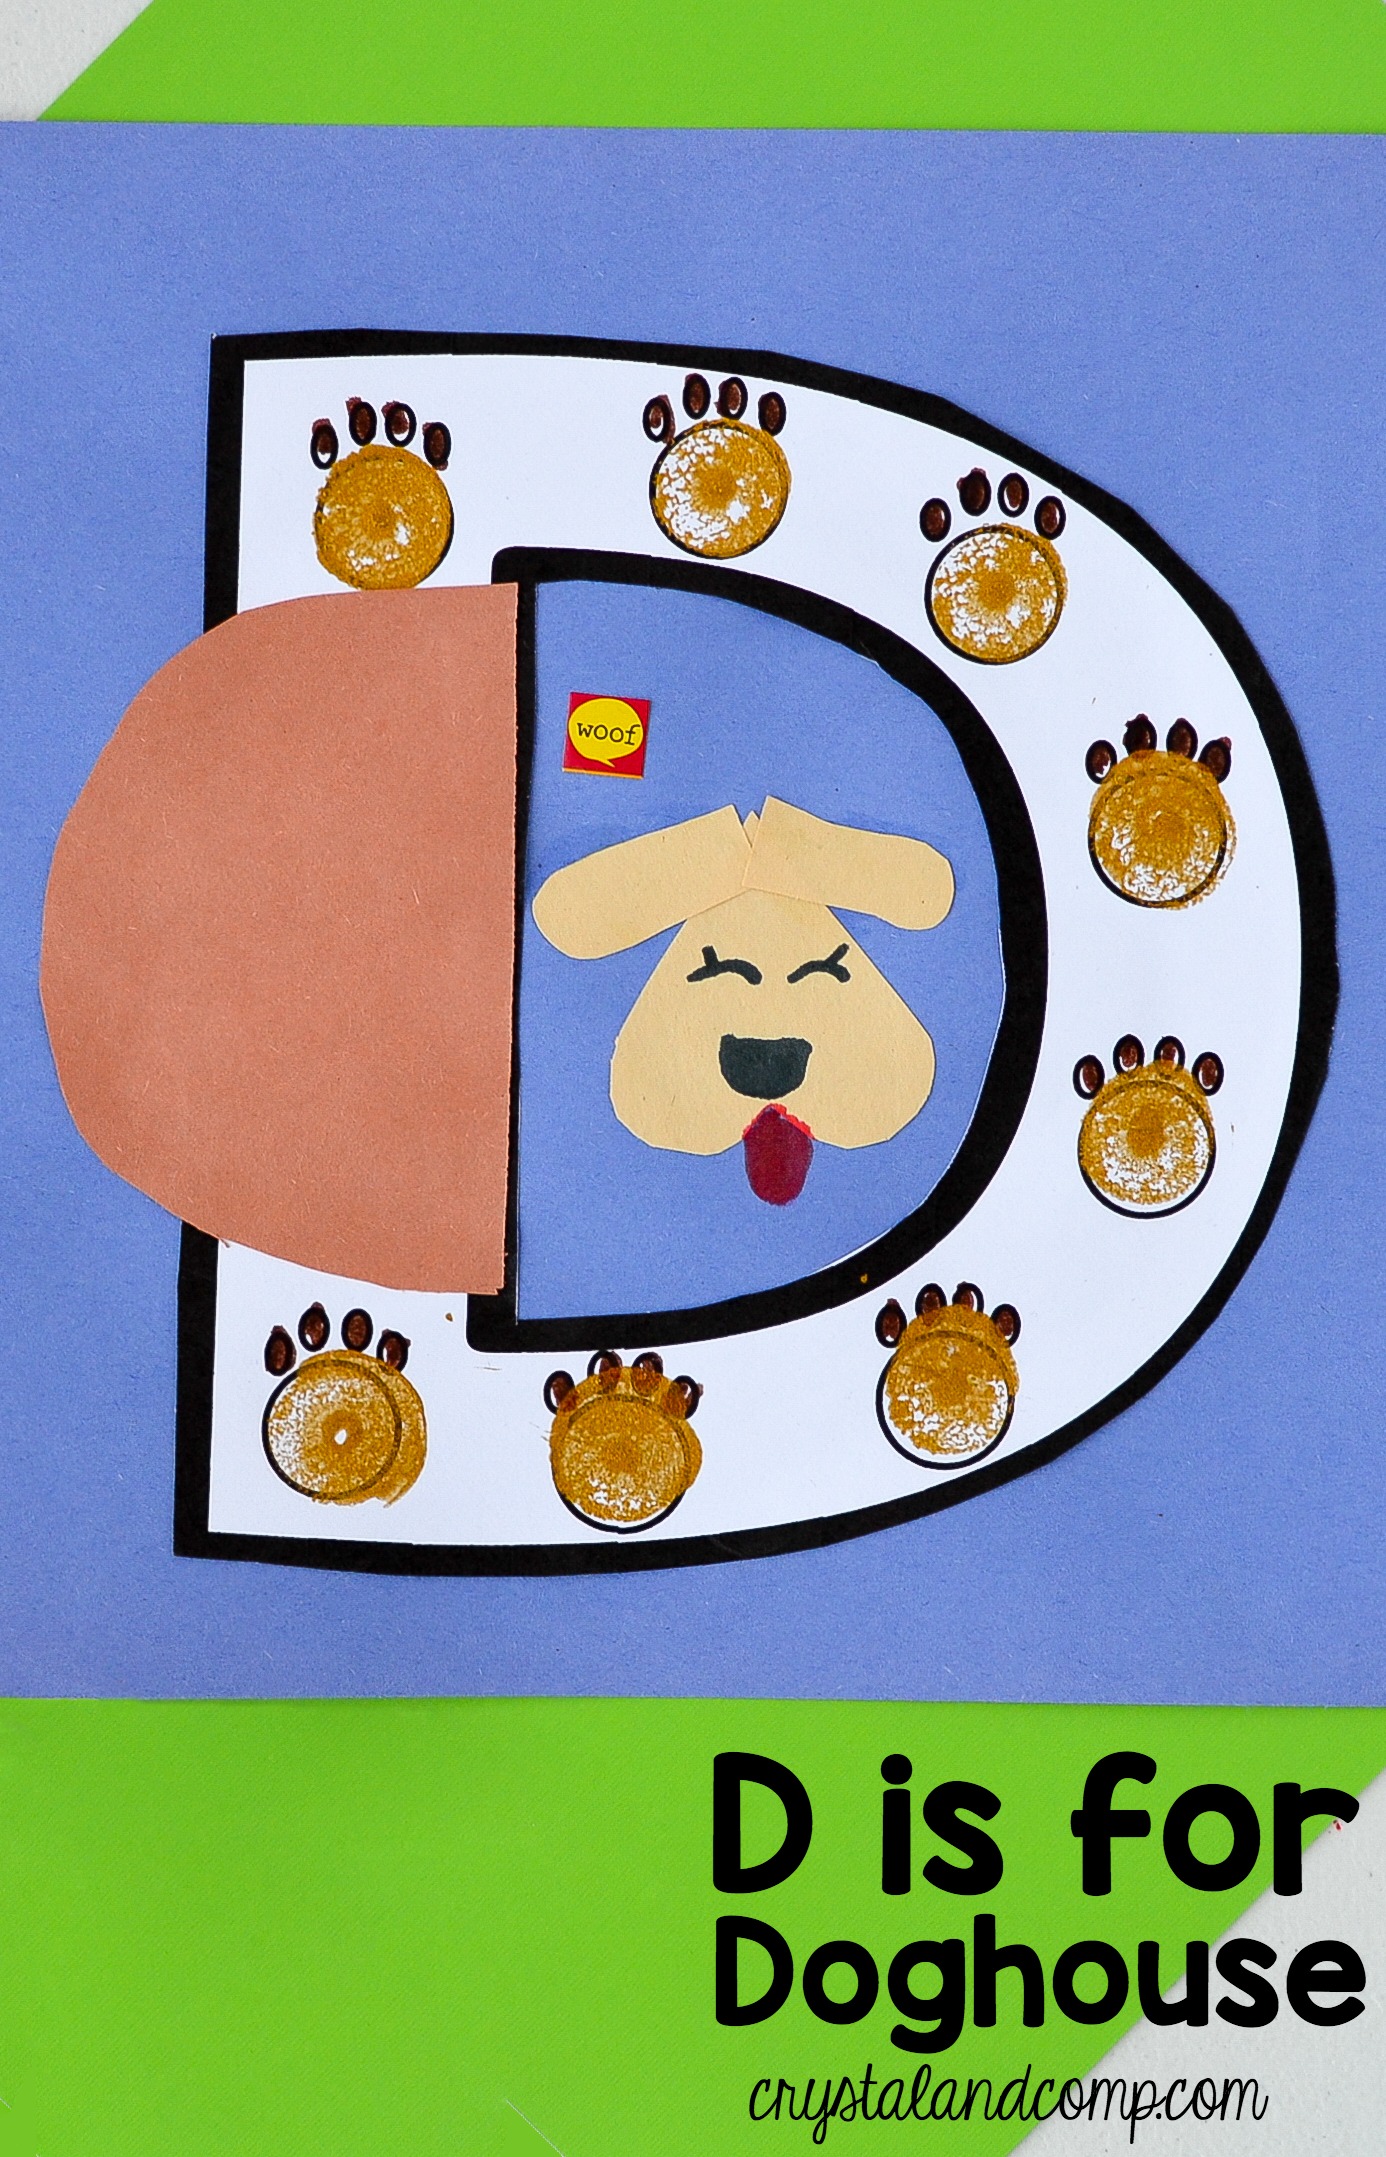 D is for Doghouse: Preschool Letter of the Week Craft